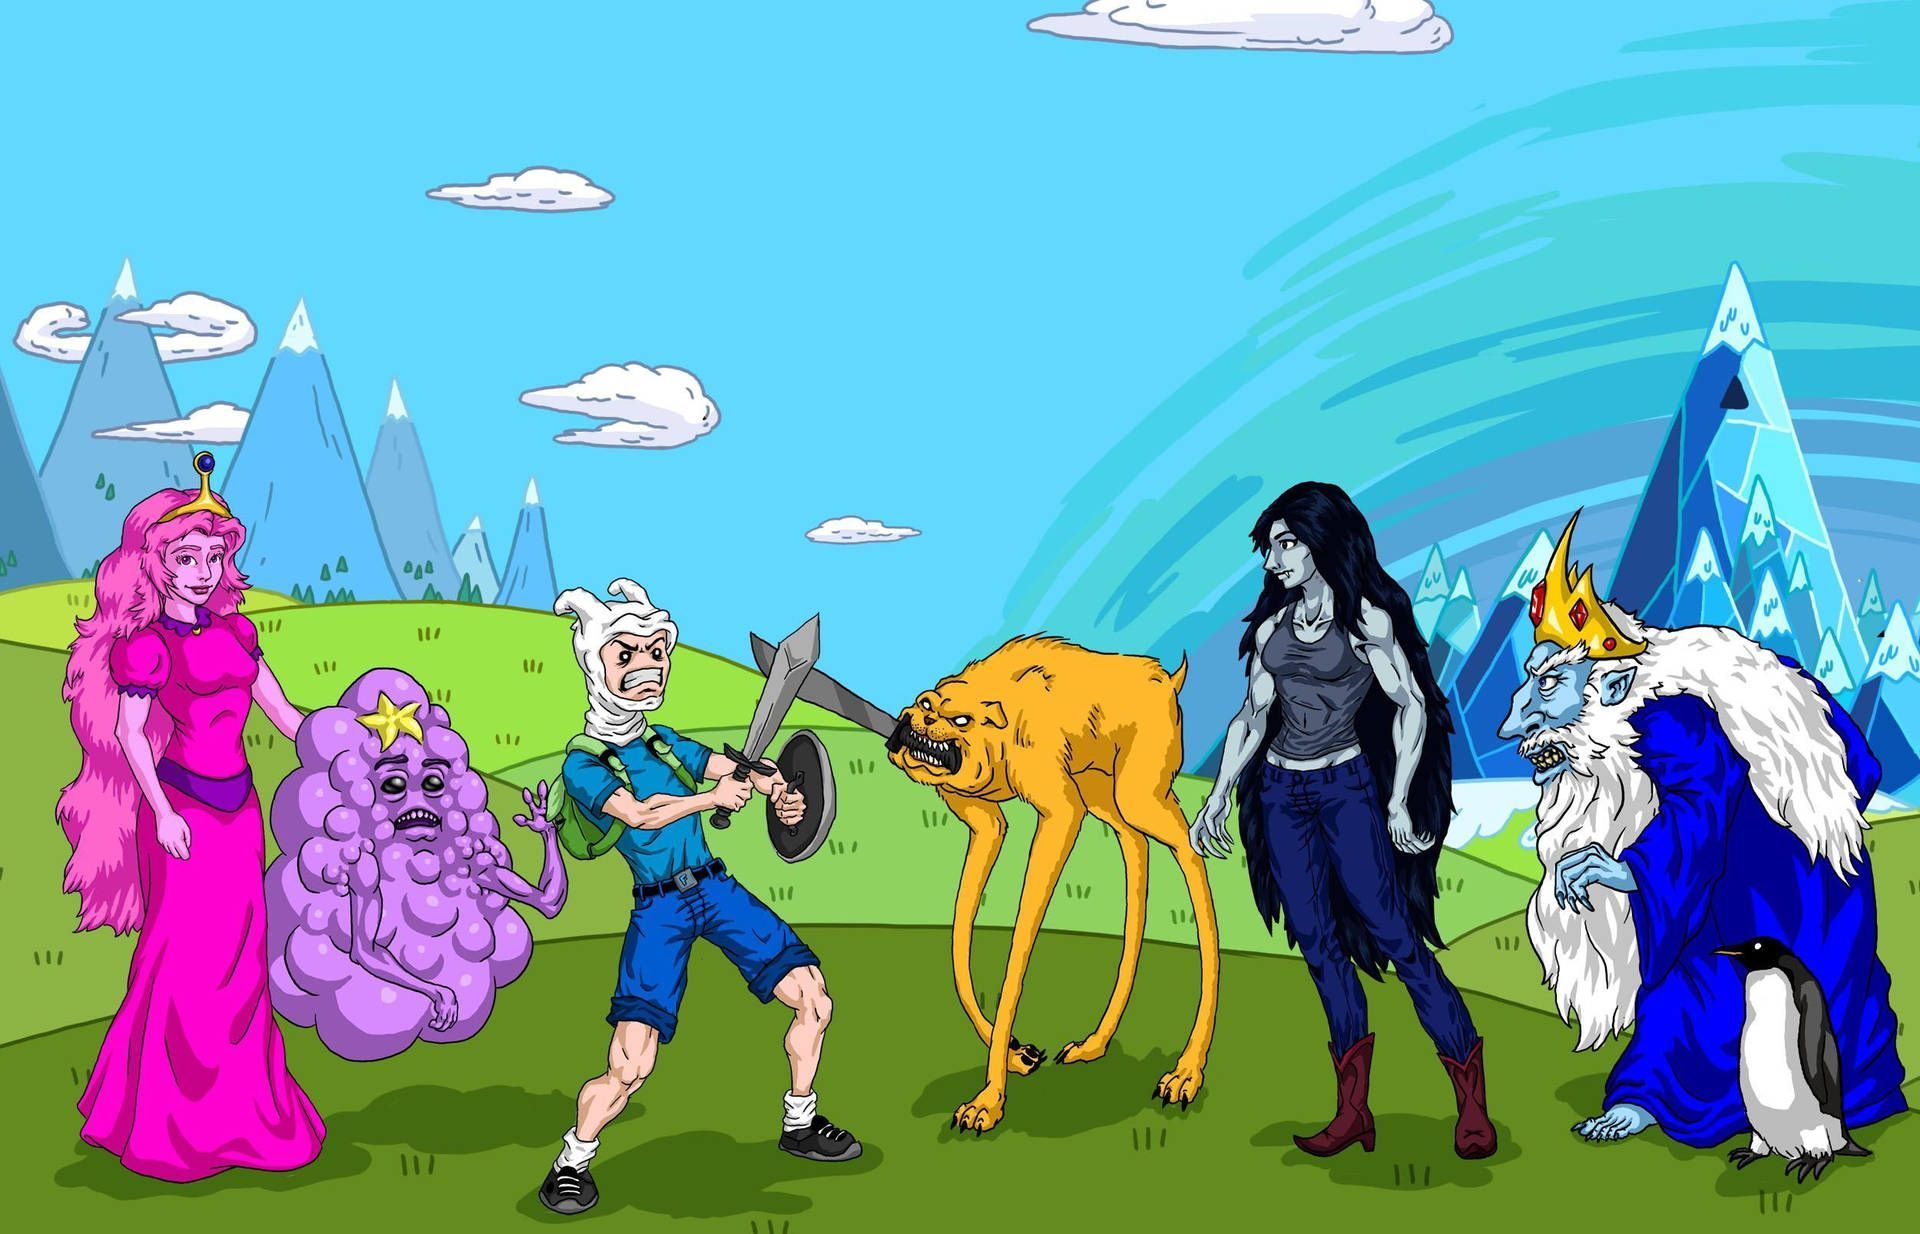 Adventure Time wallpaper 1920x1080 download free 1920x1080 - Adventure Time